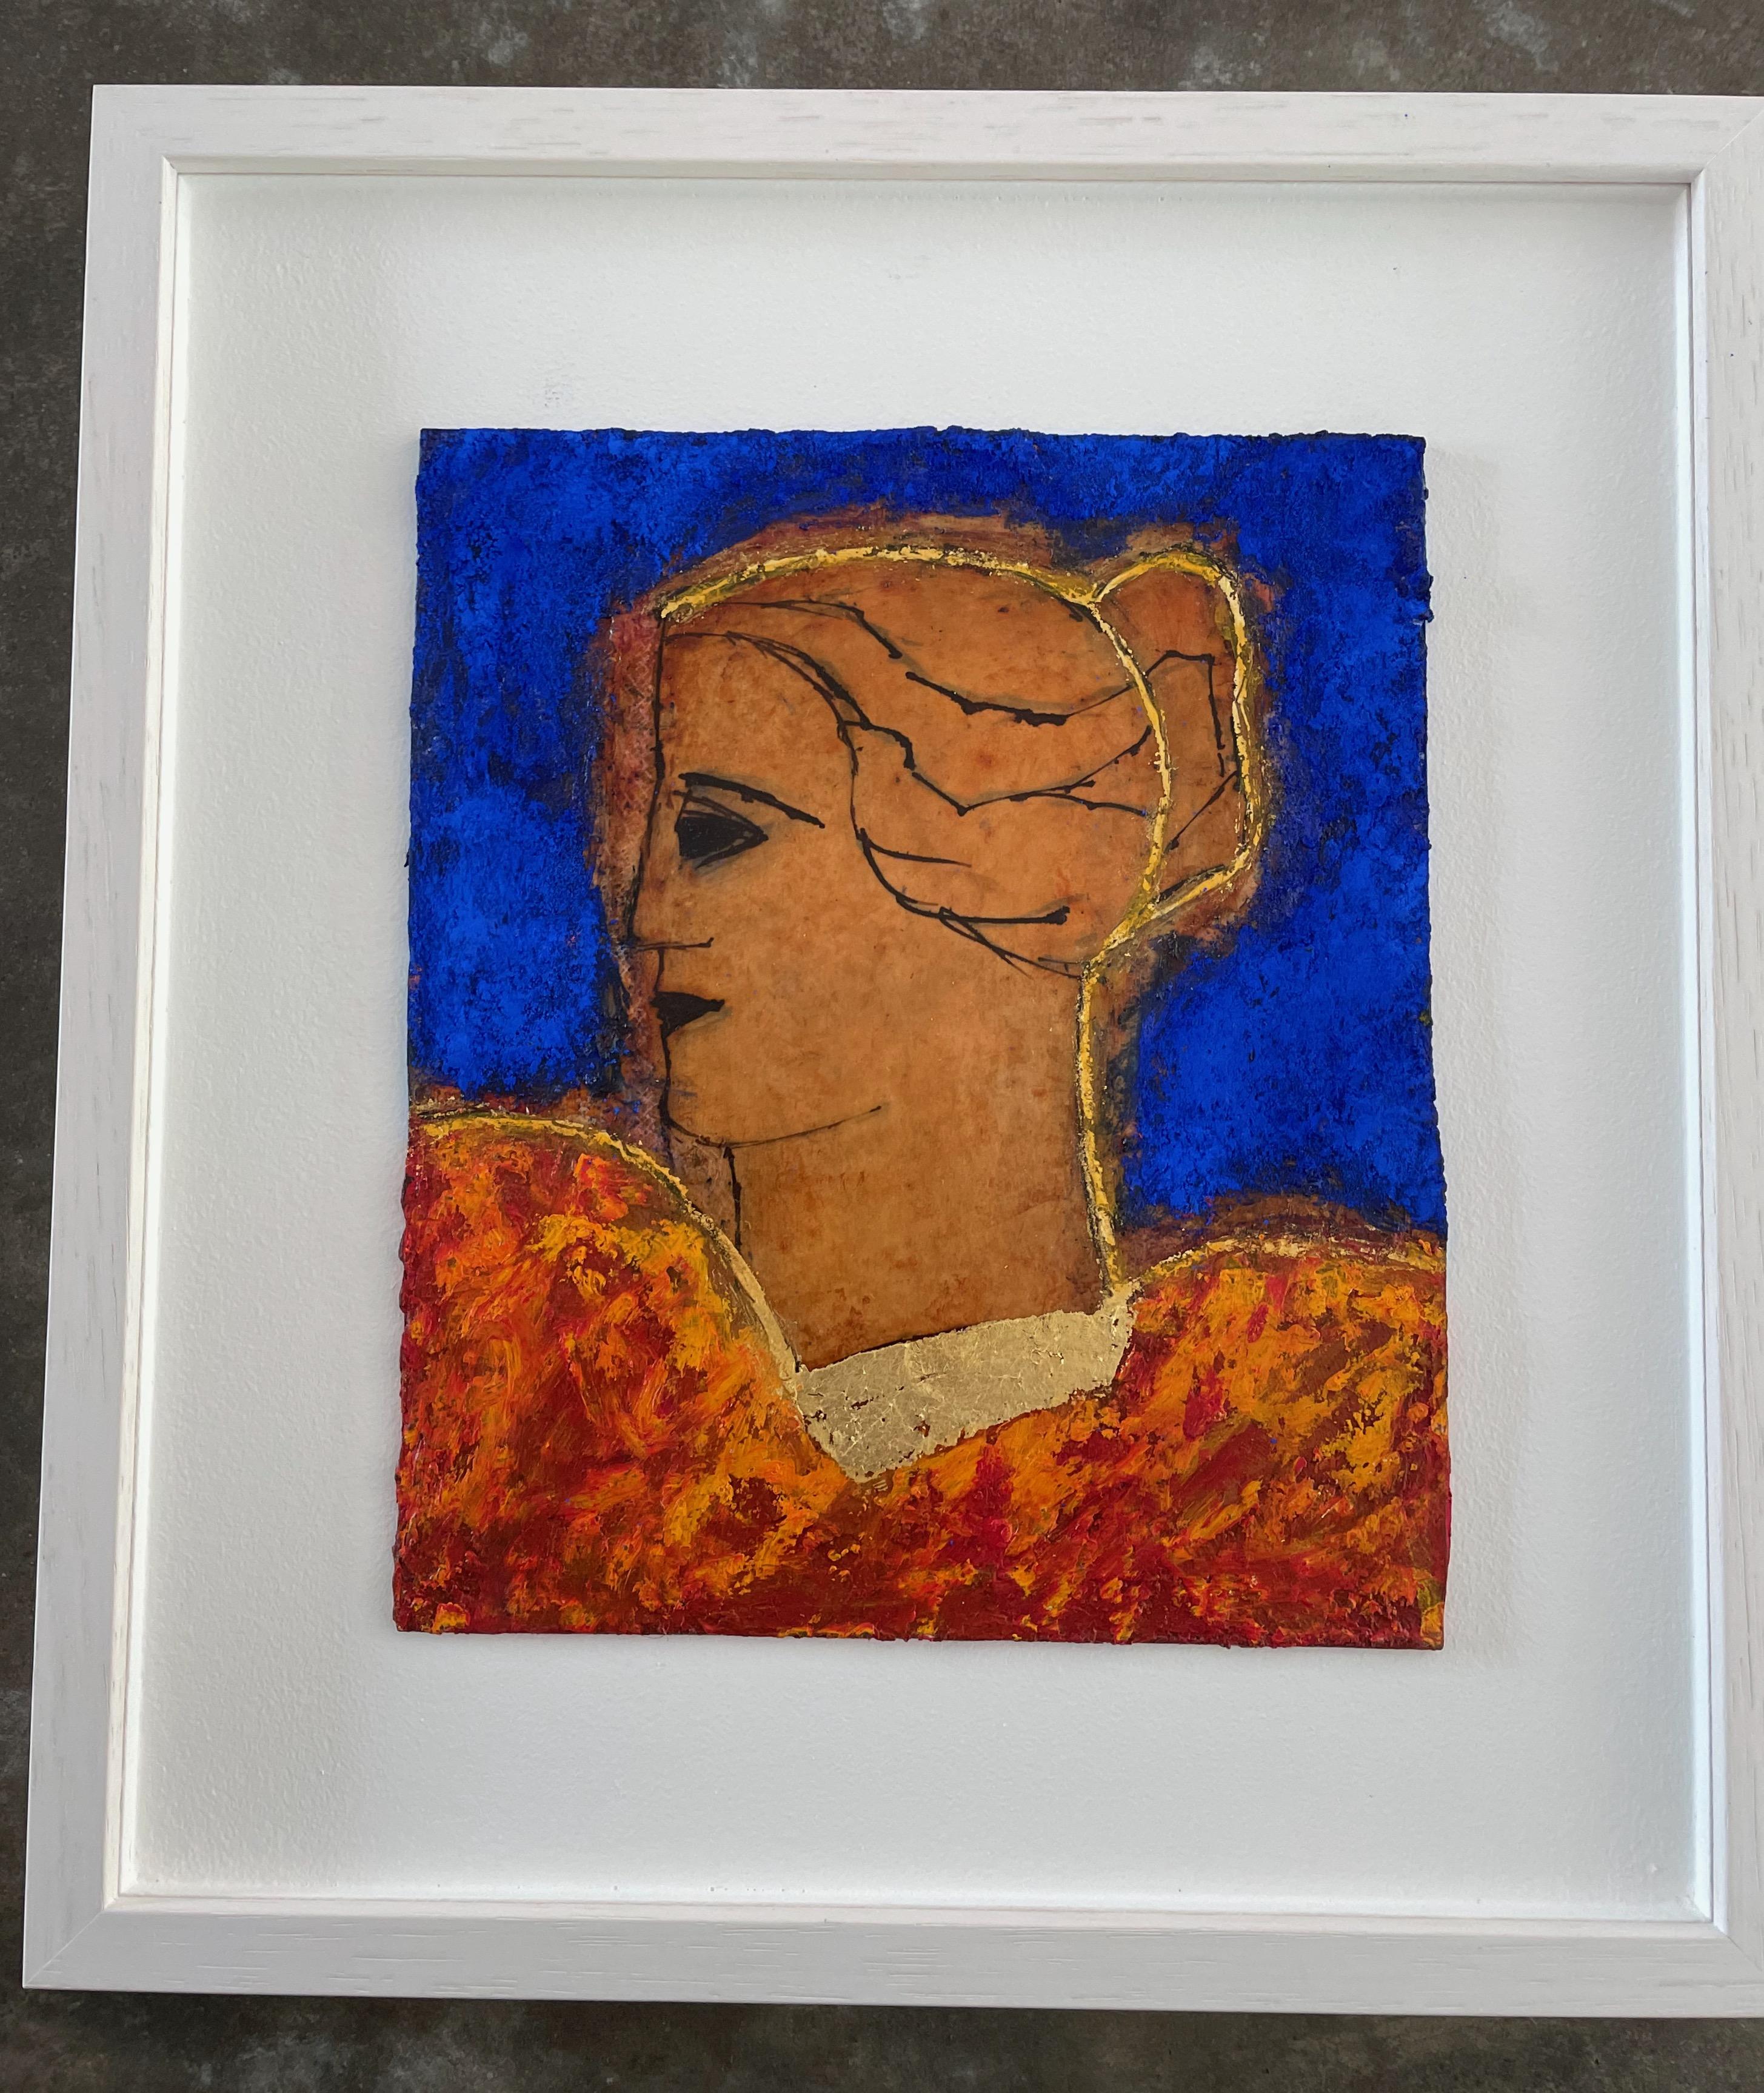 Latest opulent work from the artist’s very popular Classical Head series.

Oil and gold leaf on board

Signed verso


Framed 13.5